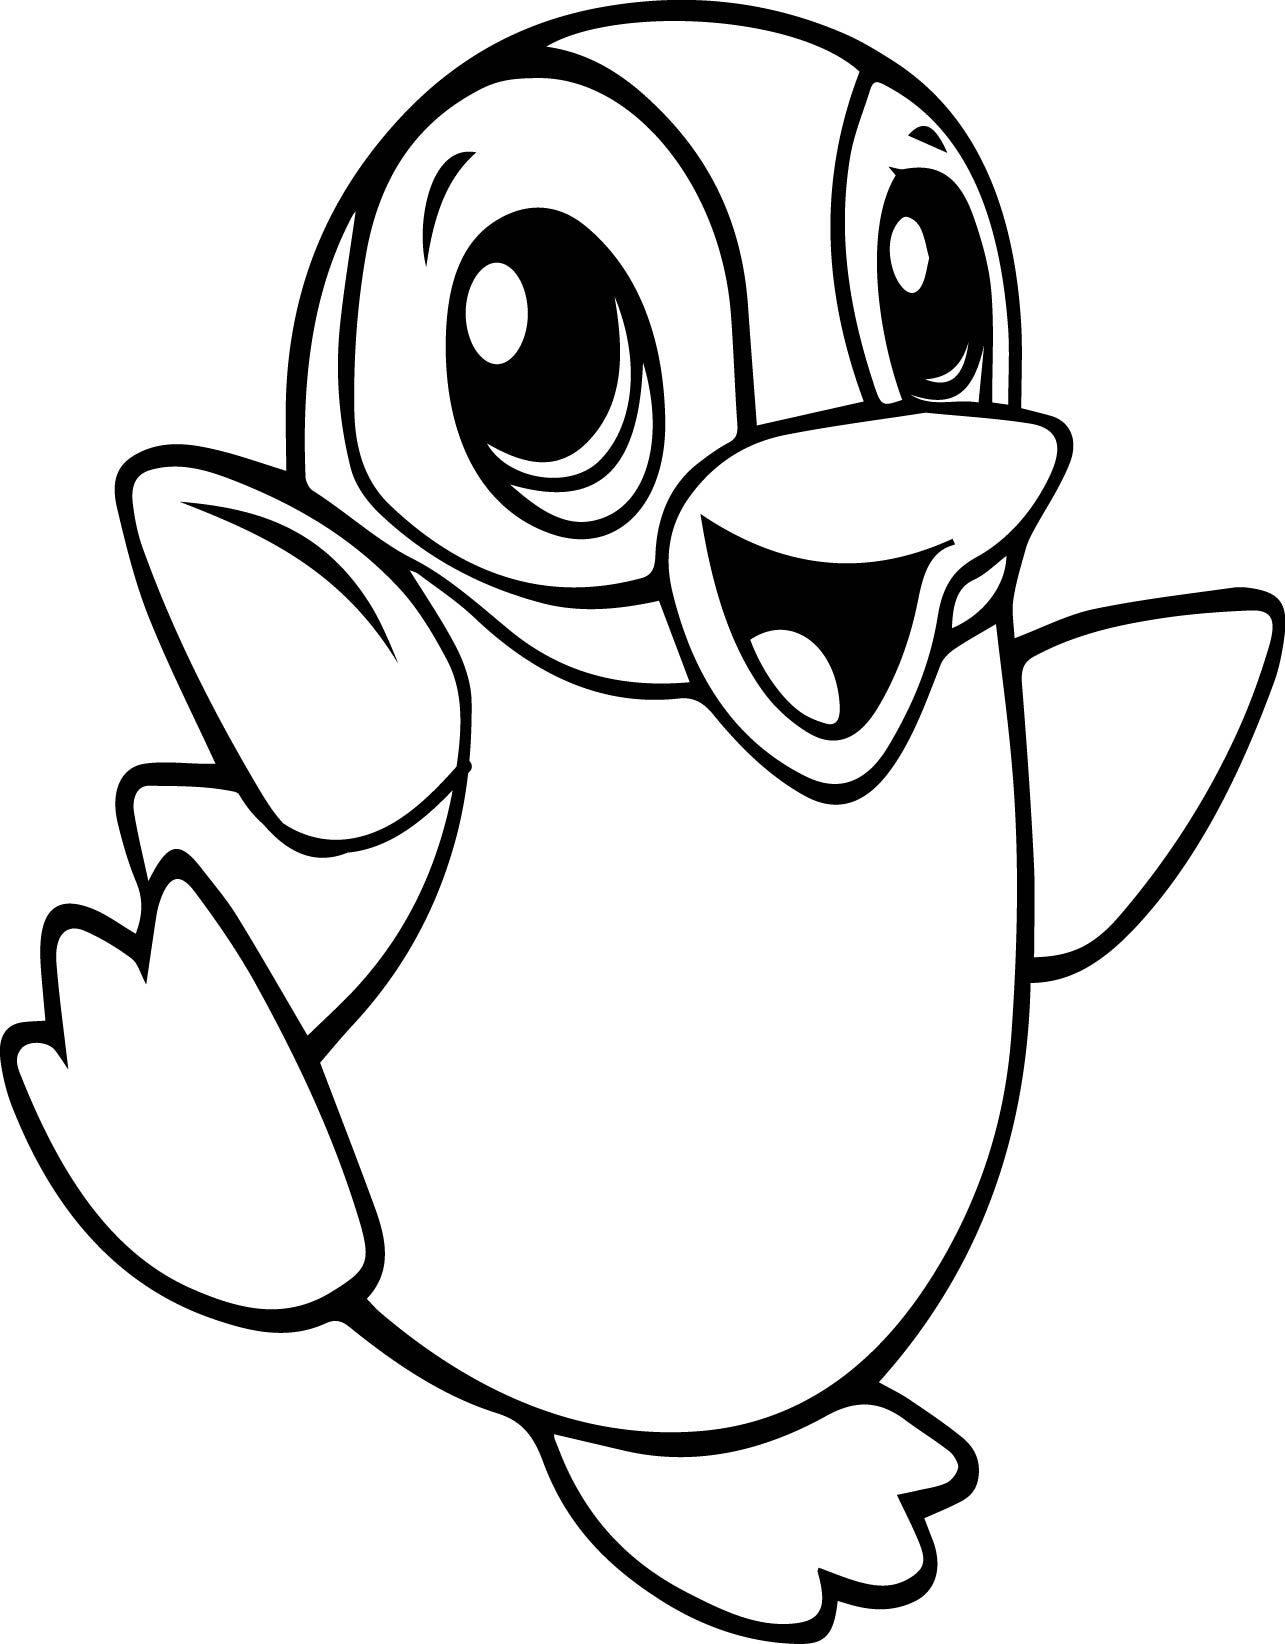 Big Eyed Animal Coloring Pages at GetColorings.com   Free printable ...